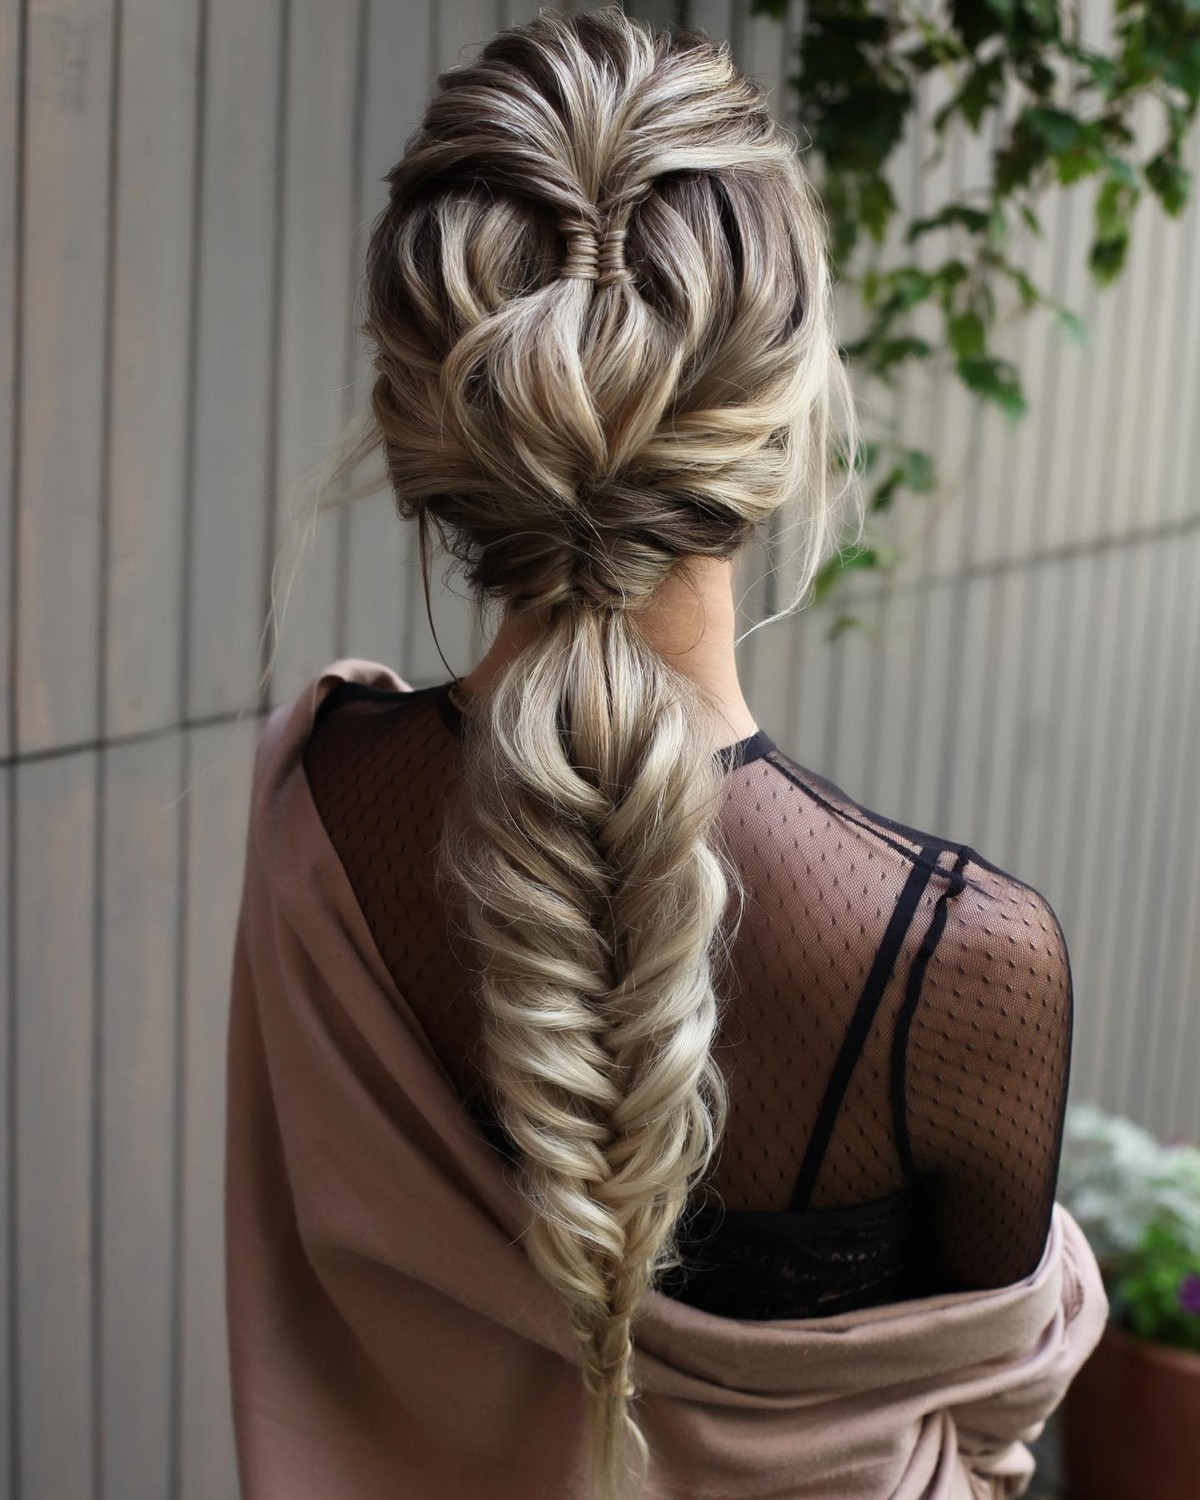 Customize Braid With Fishtail